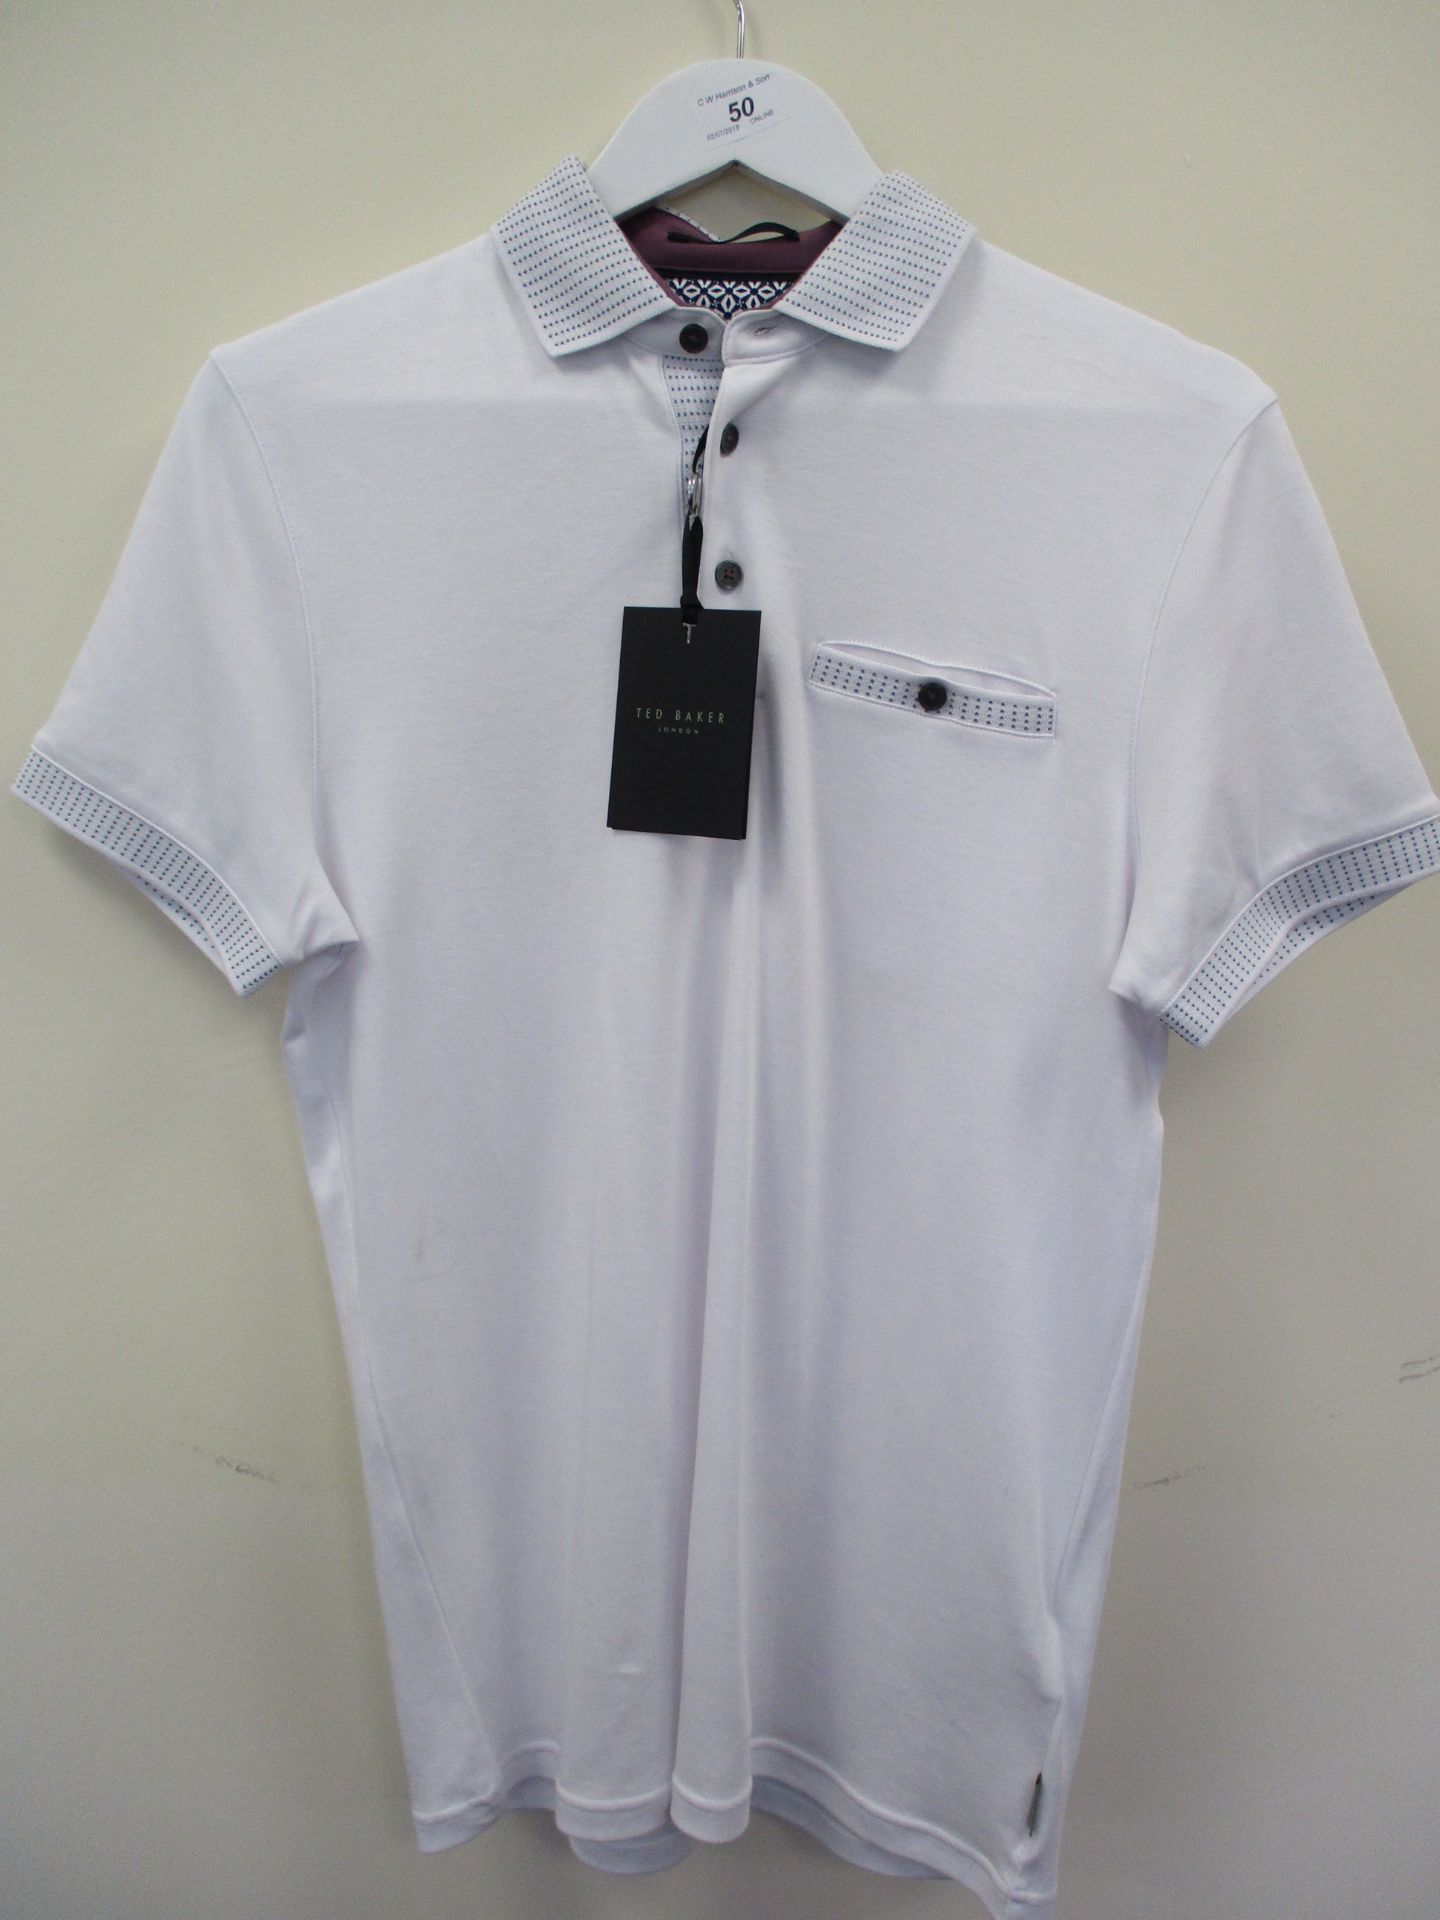 Ted Baker polo shirt - white - small RRP £65